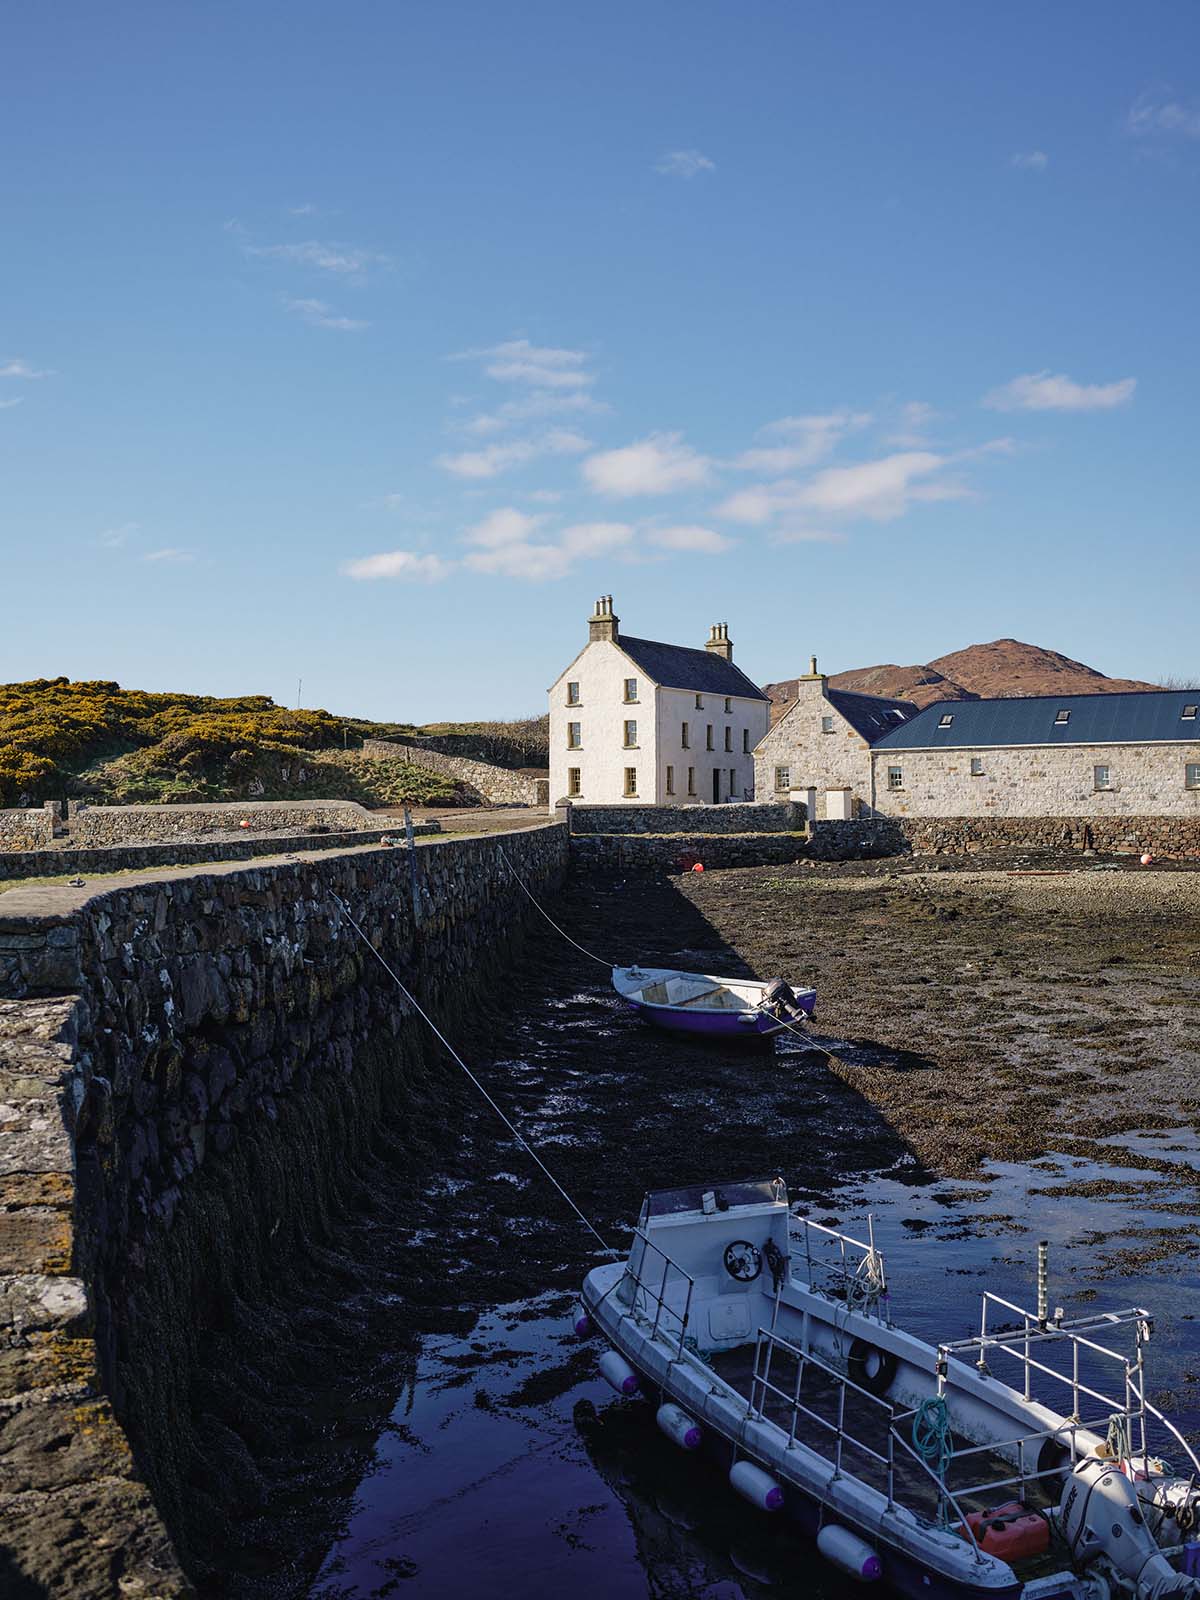 The exterior is pictured, nestled on the Isle of Harris